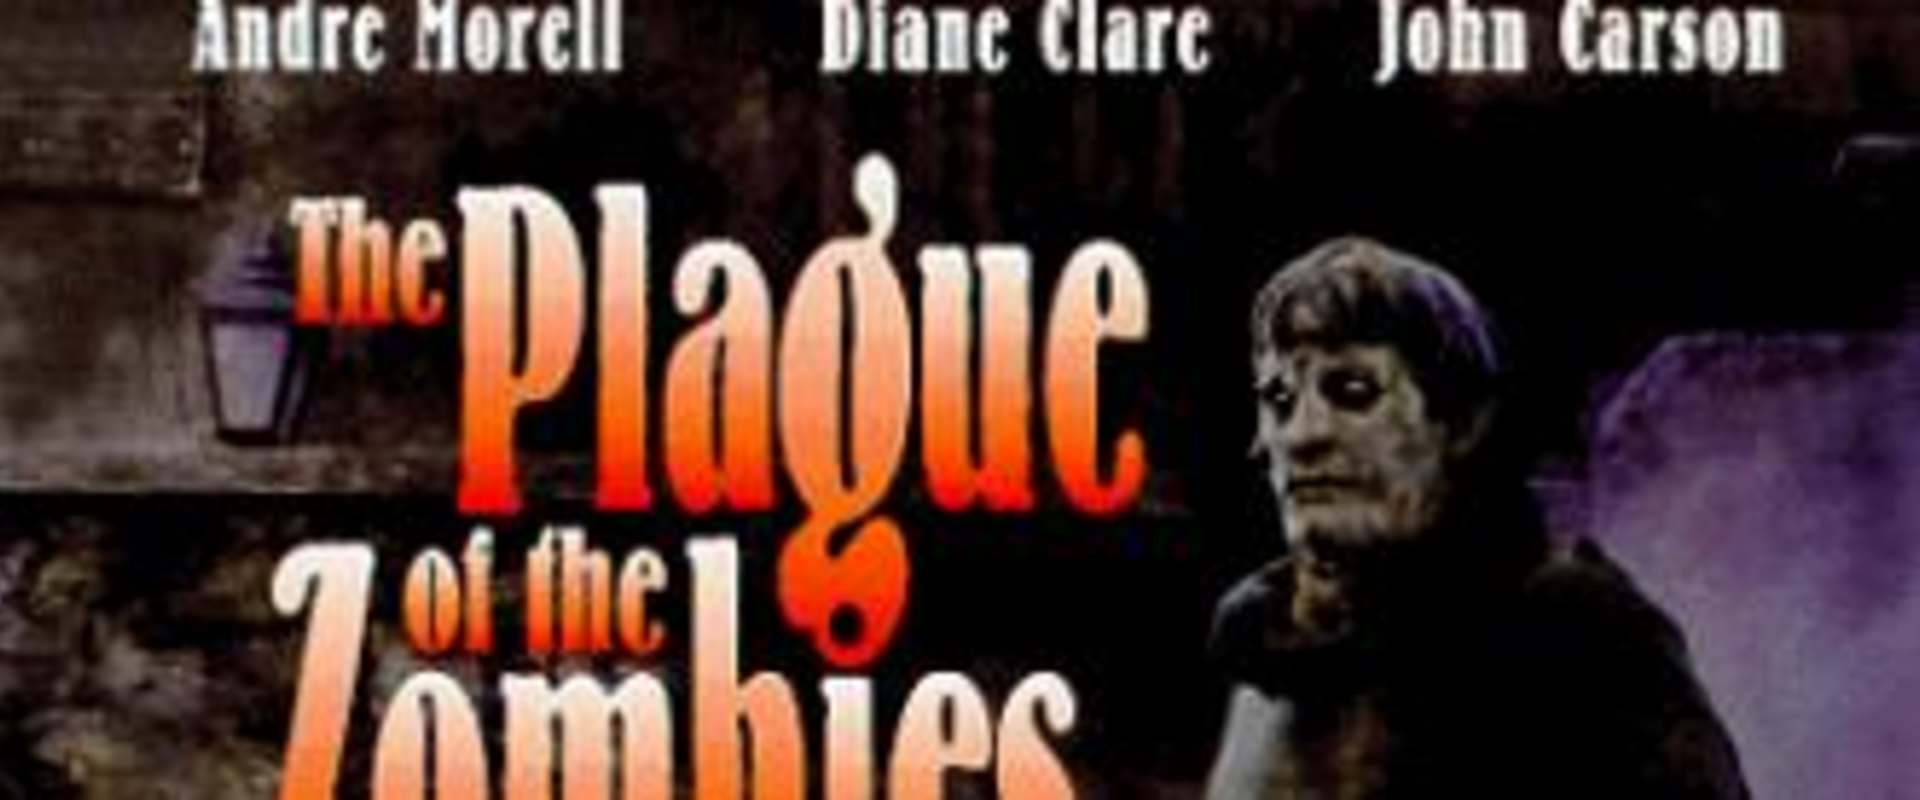 The Plague of the Zombies background 1